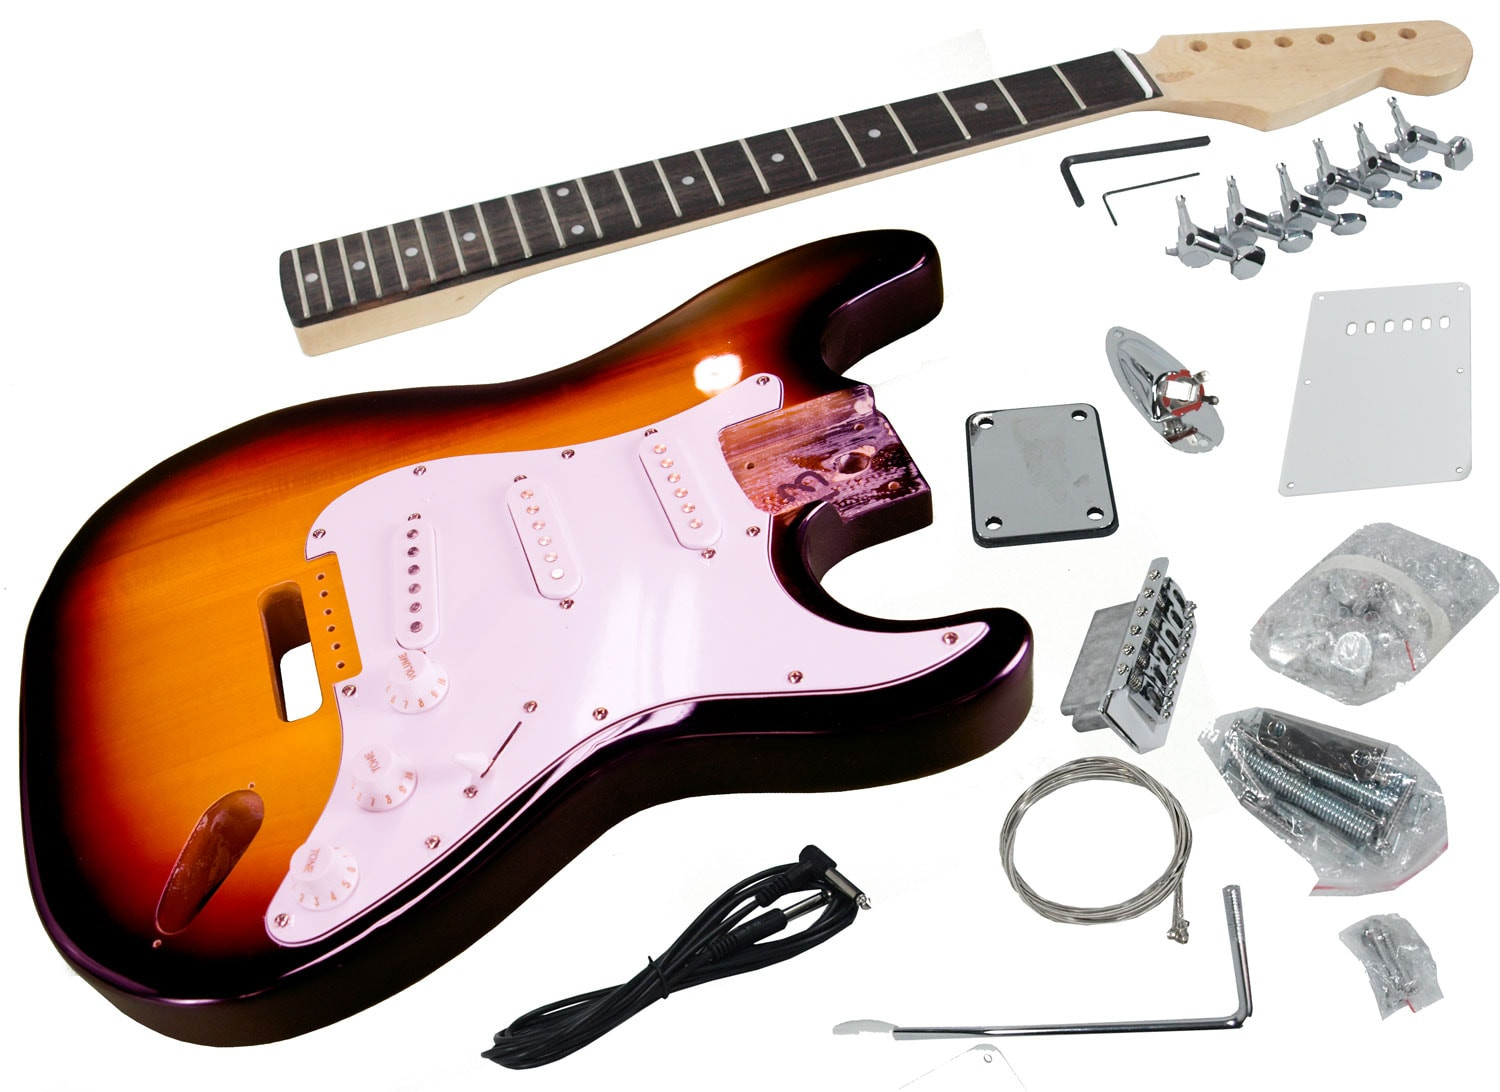 DIY Guitar Kit Review
 Solo STK 1SB DIY Electric Guitar Kit With Finished